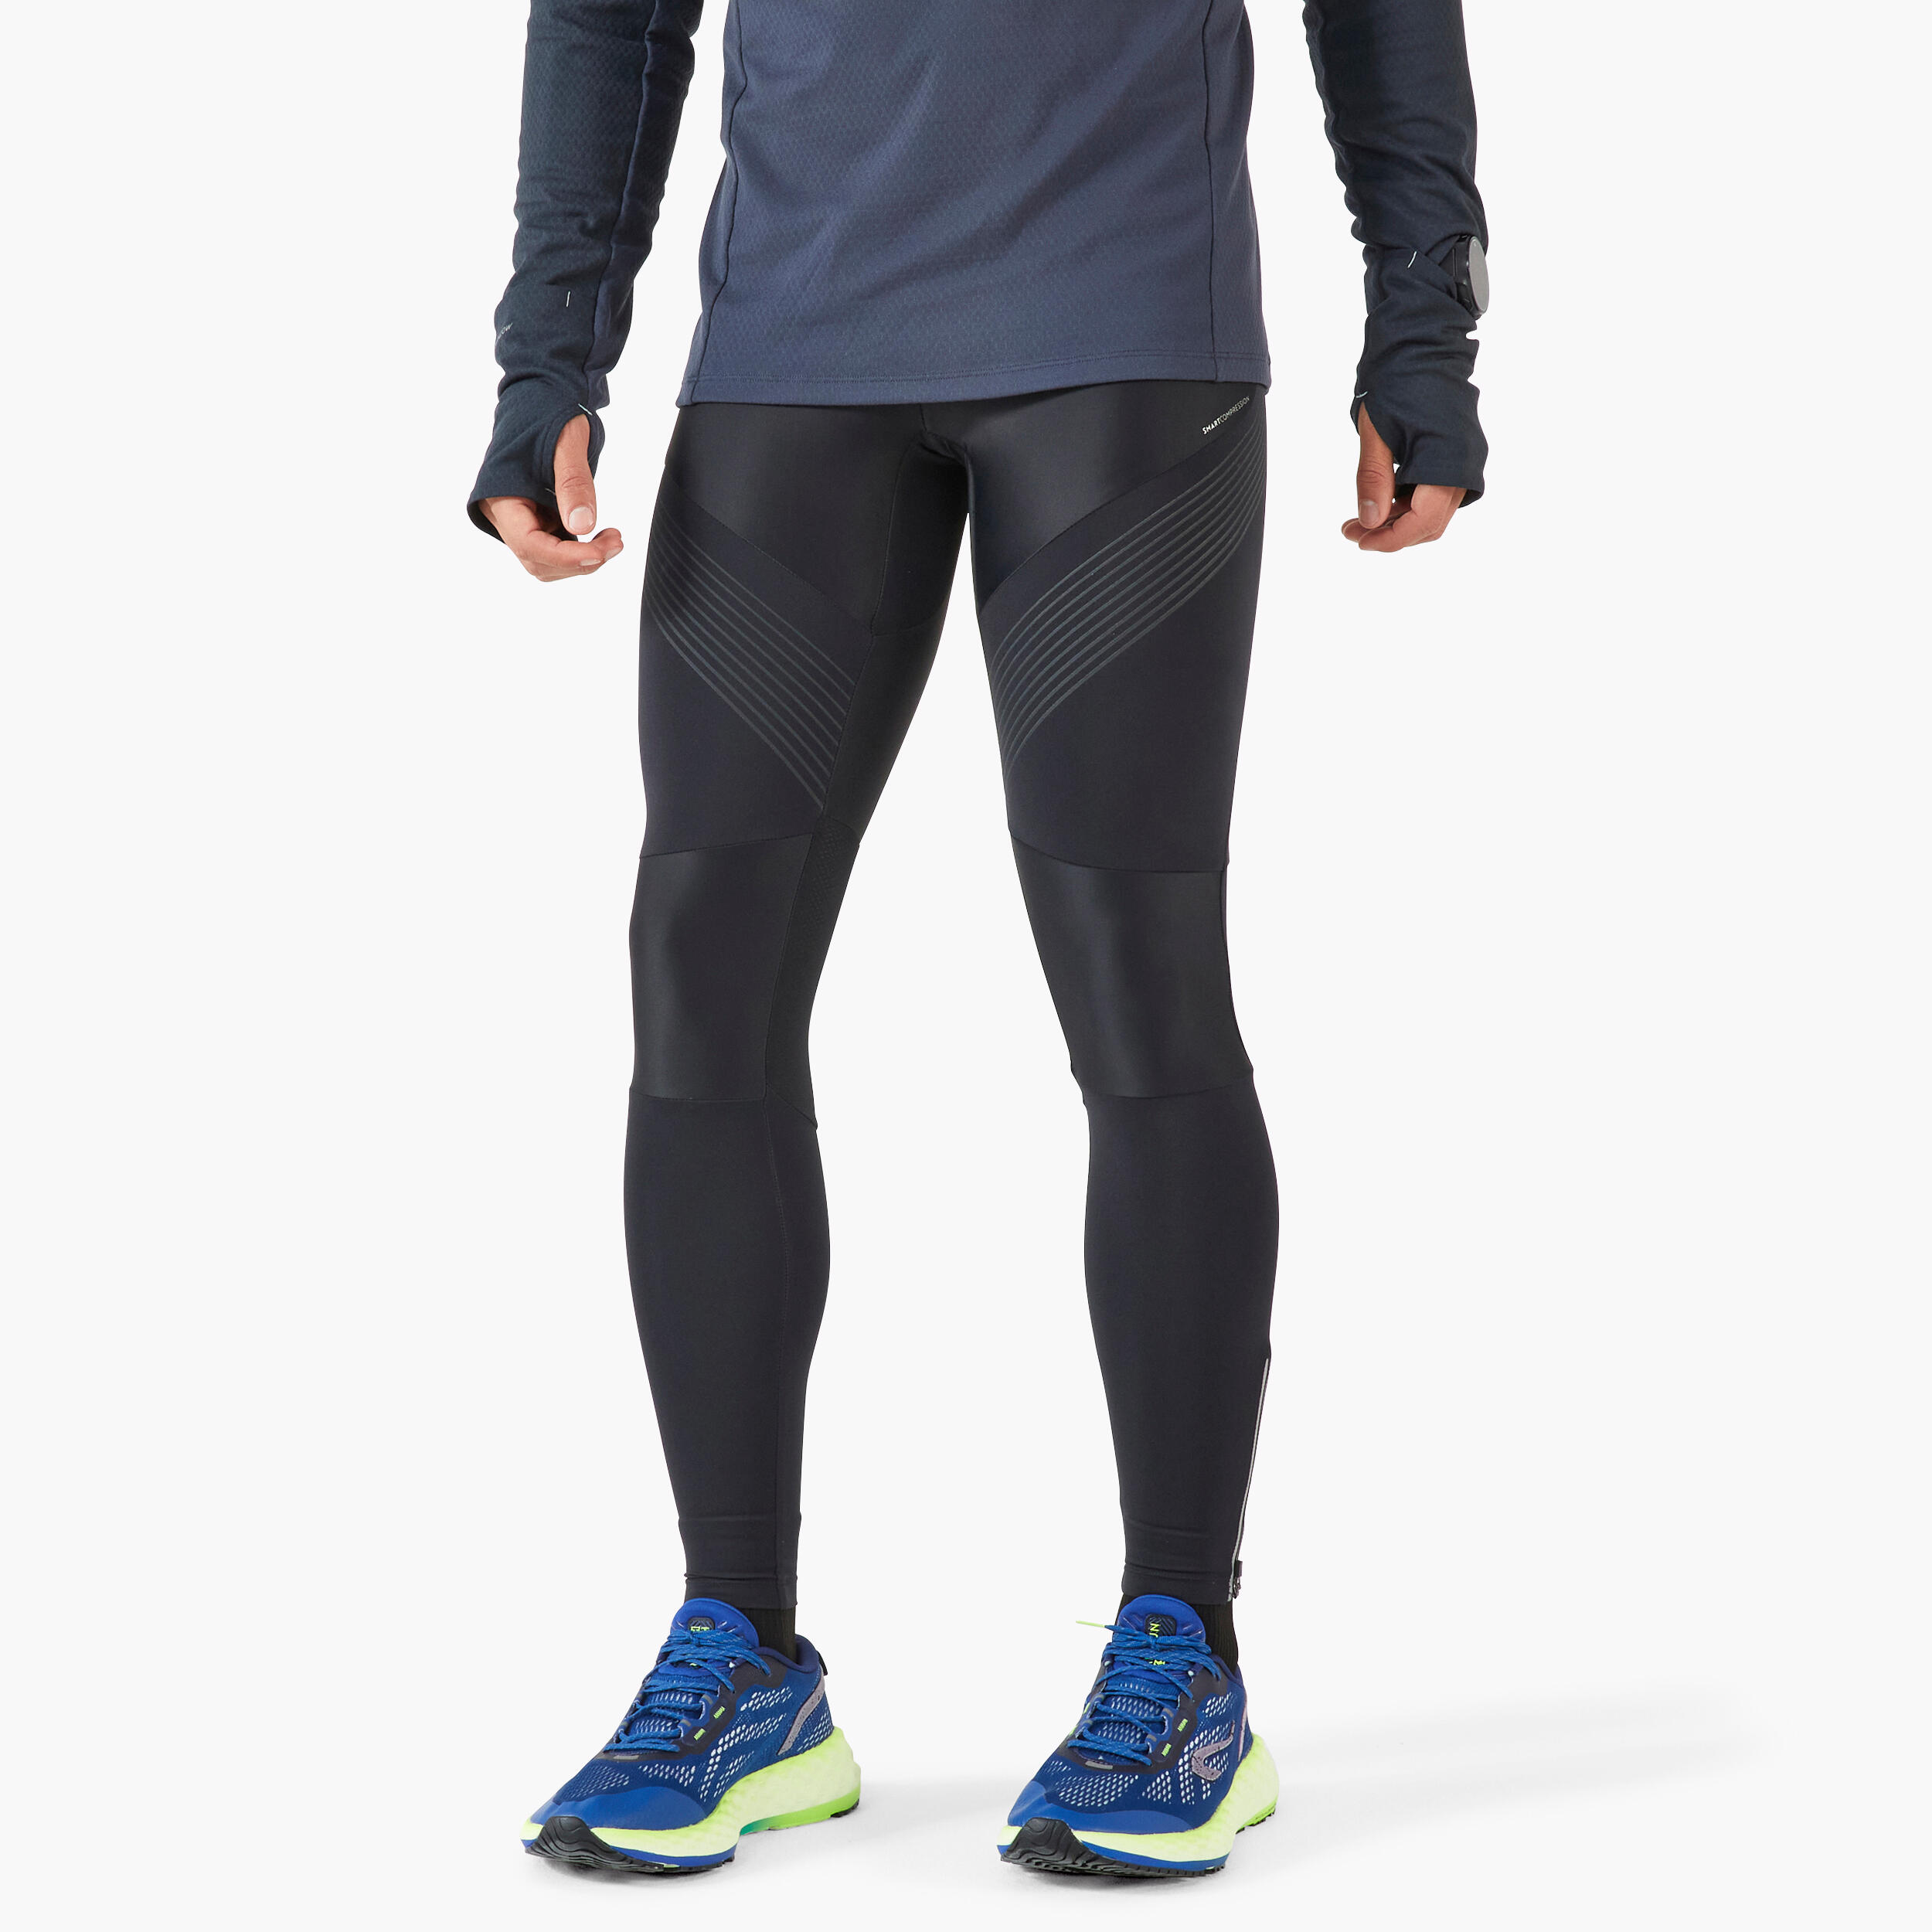 Running Gear  Running Clothing from GO Outdoors UK Shops